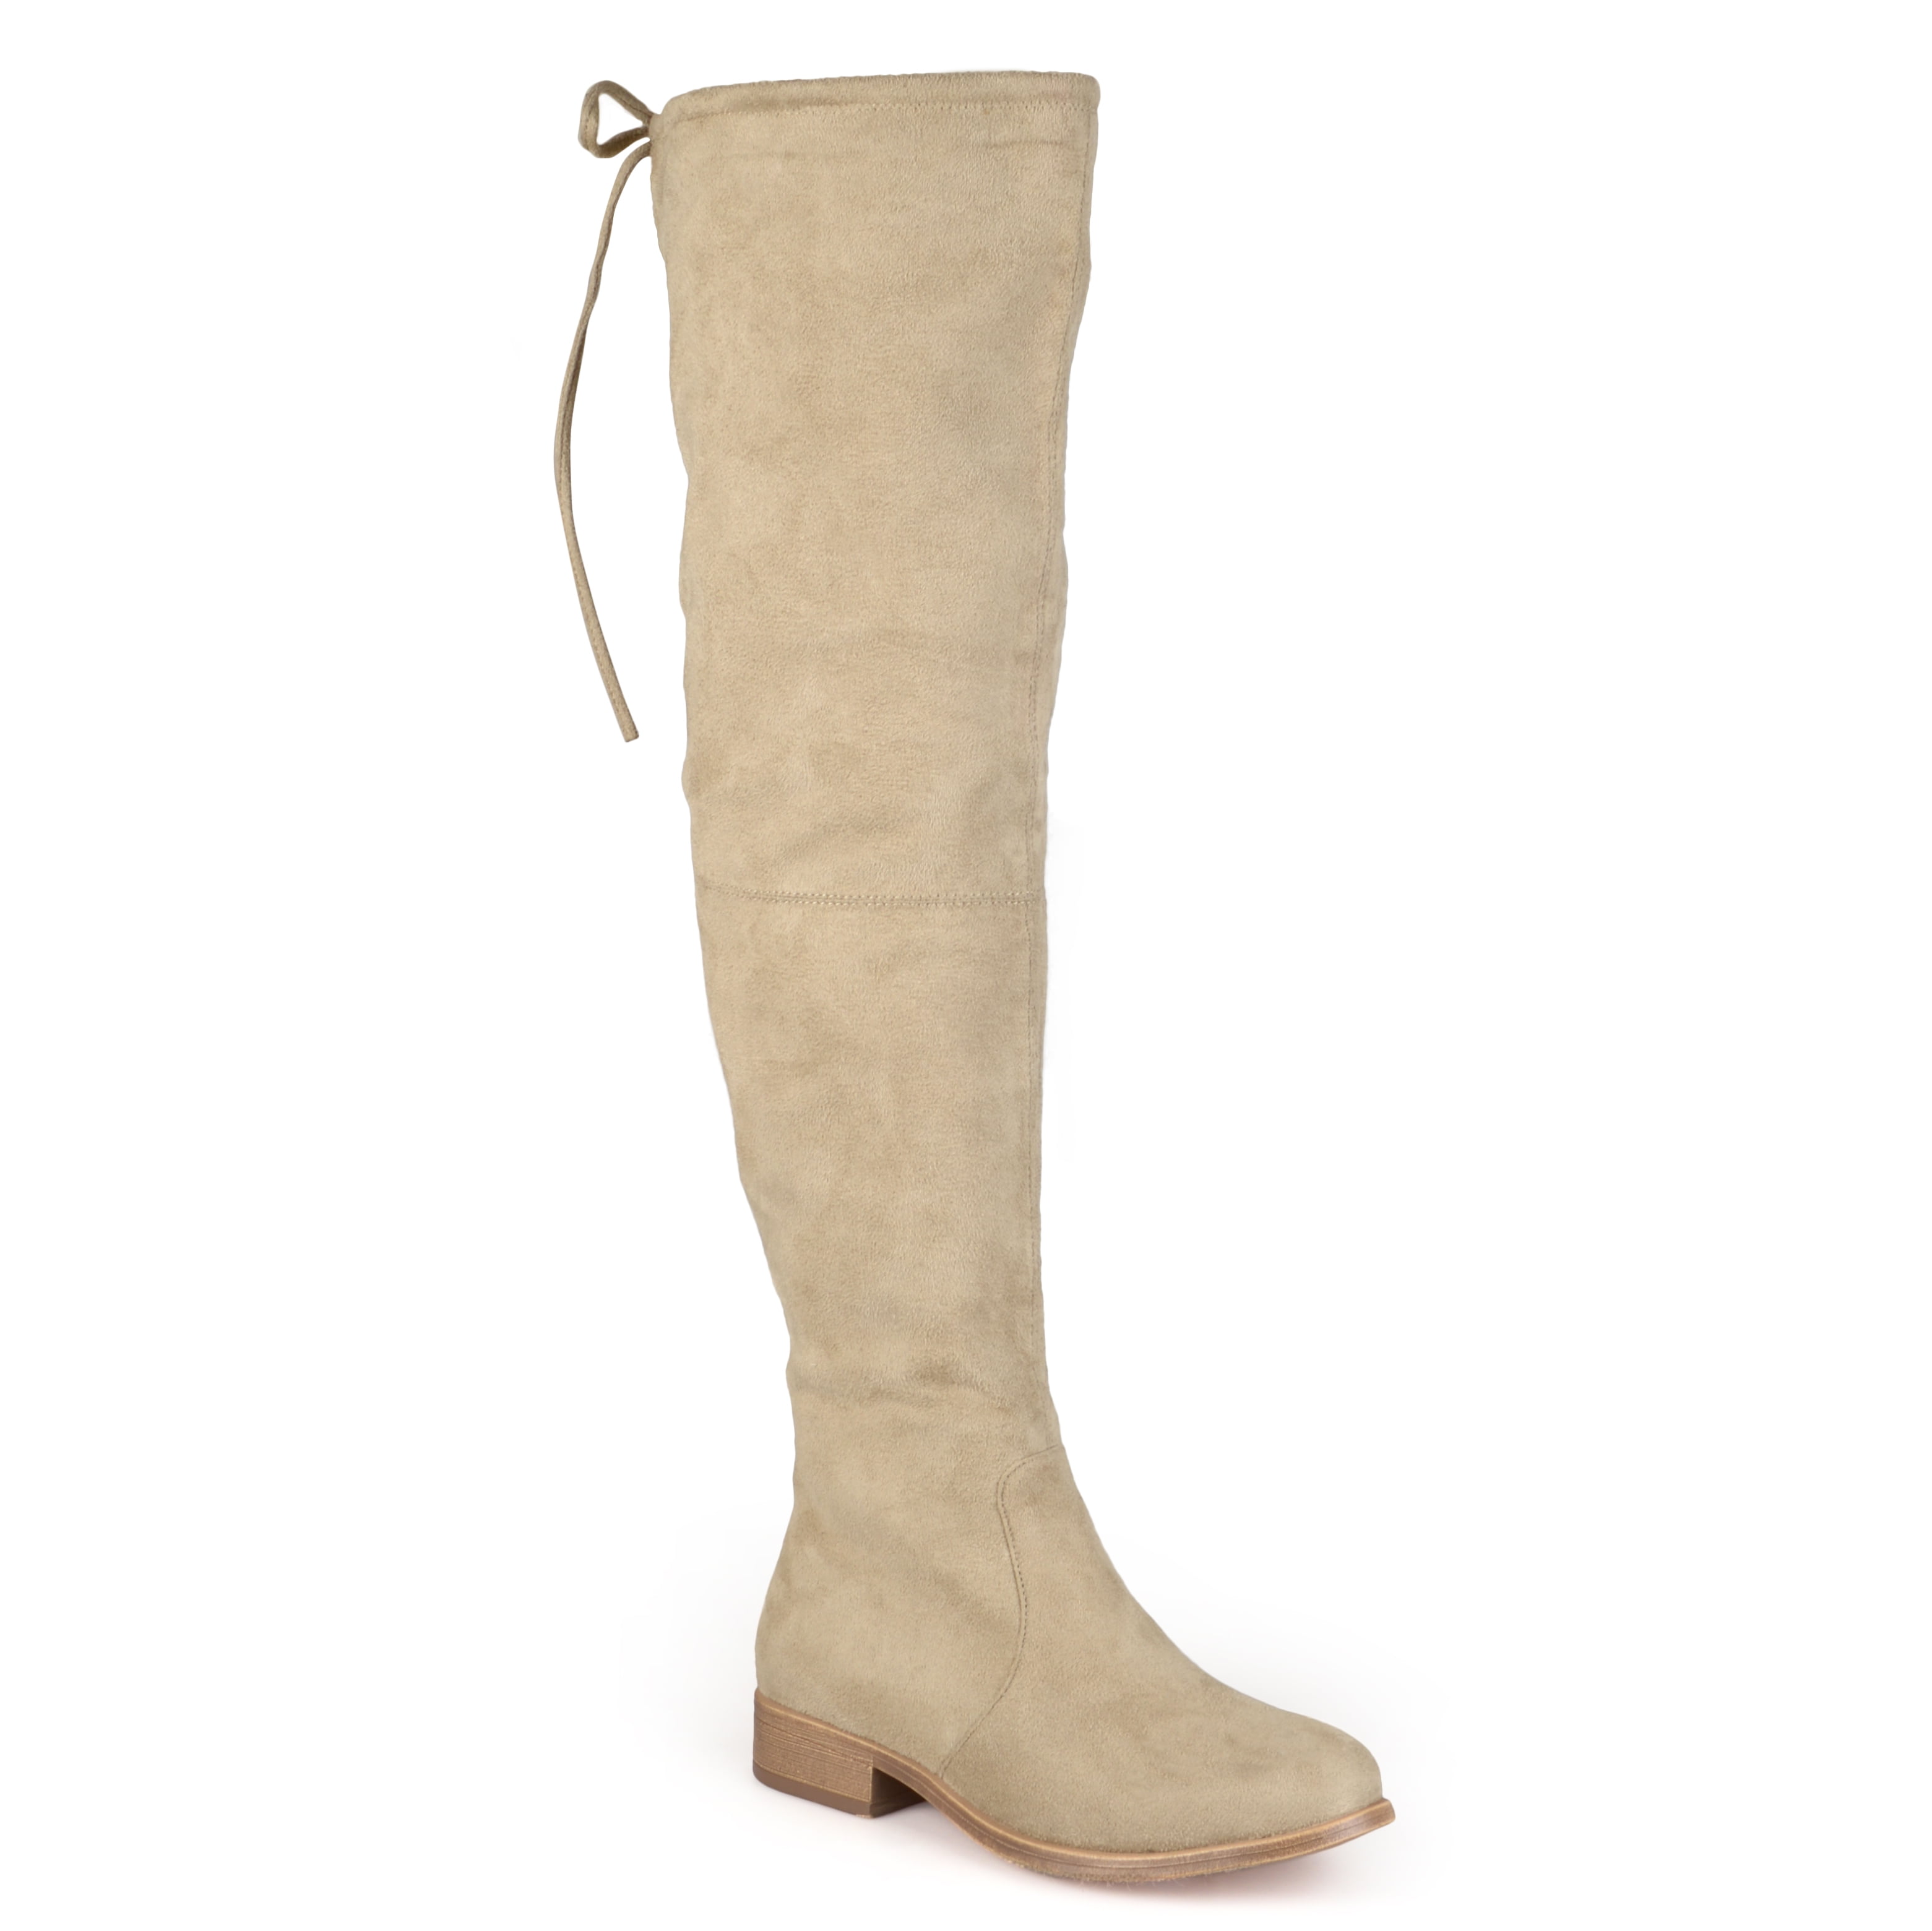 Brinley Co. Women's Wide Calf Faux Suede Over-the-knee Boots - Walmart.com